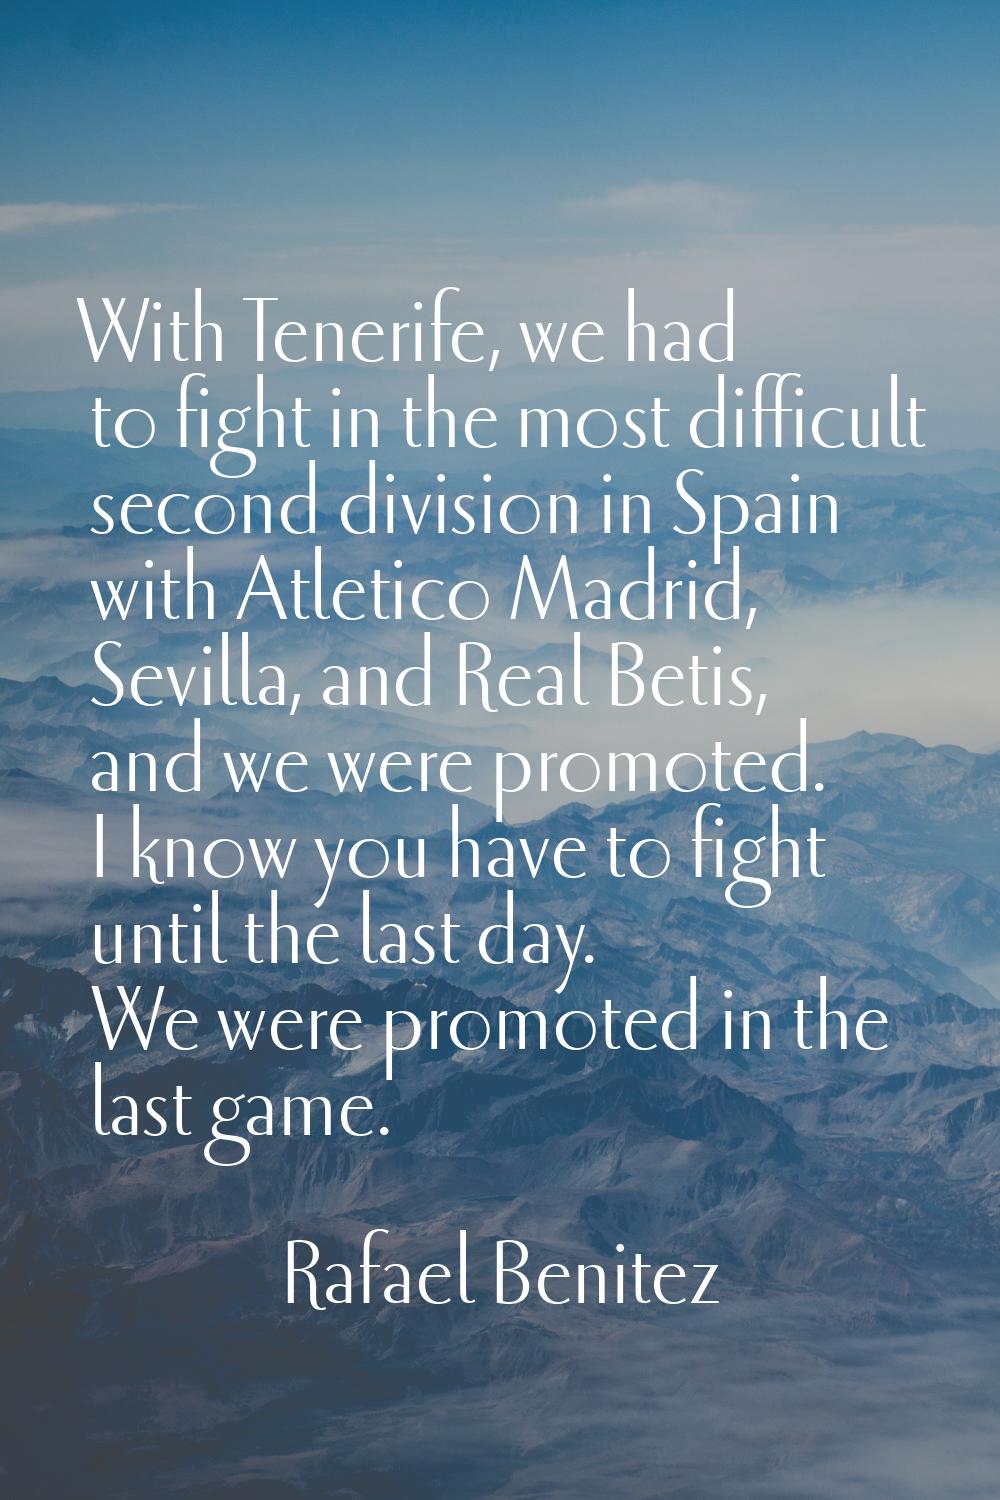 With Tenerife, we had to fight in the most difficult second division in Spain with Atletico Madrid,